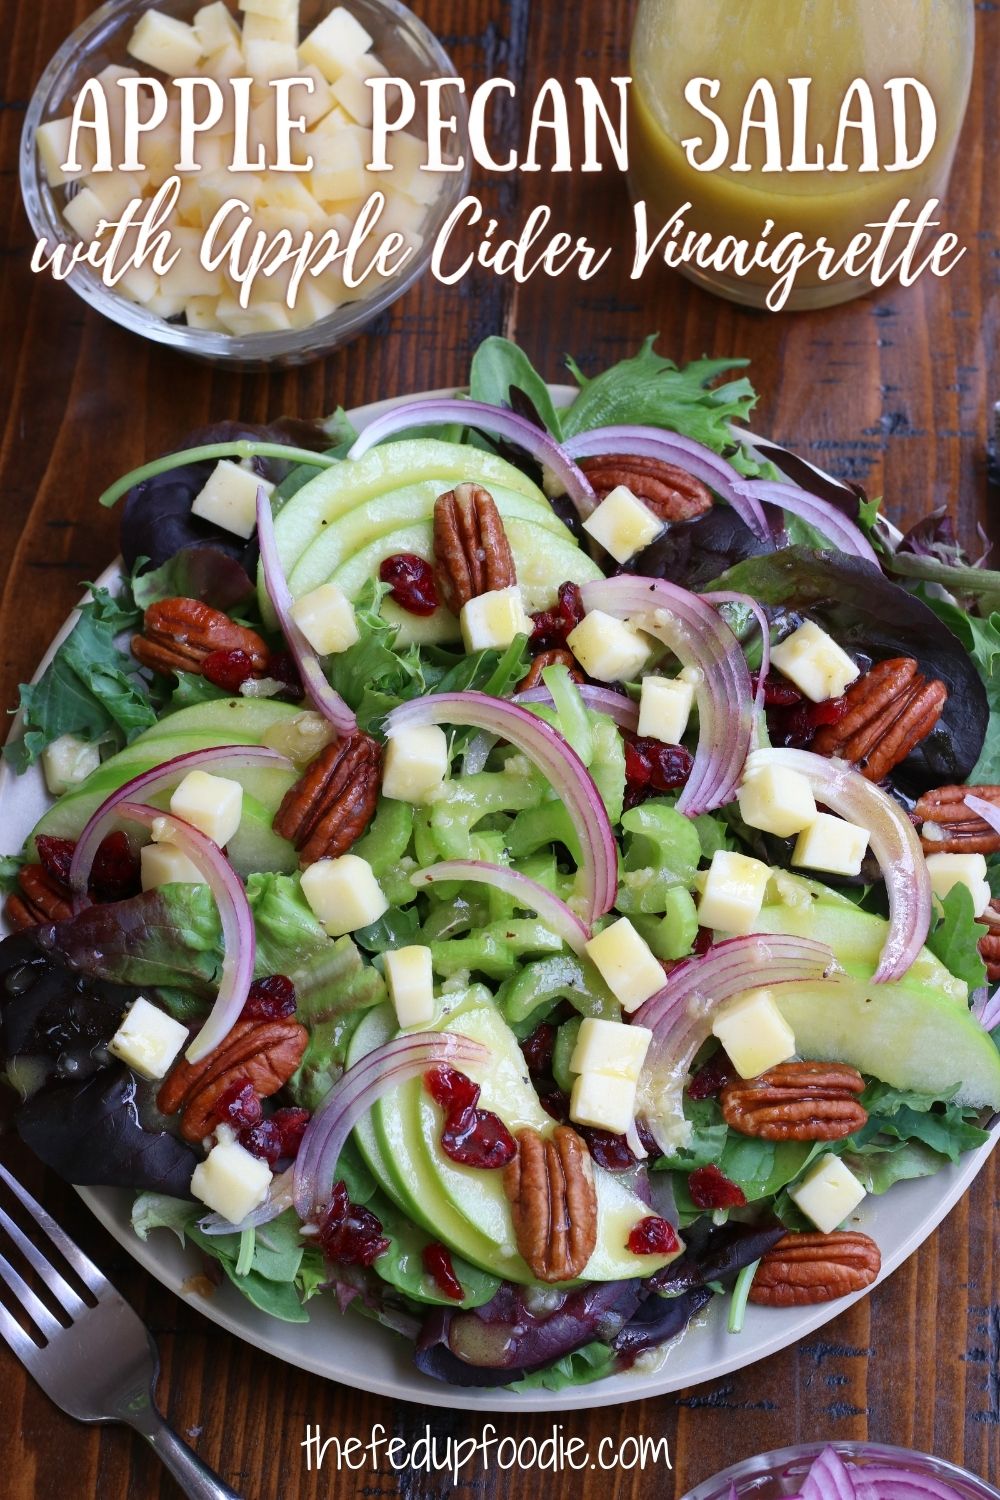 Apple Pecan Salad is an easy and delicious fall salad with irresistible creamy and crunchy textures. Served with a homemade Apple Cider Vinegar Dressing, this becomes a delicious and satisfying side dish.
#ApplePecanSalad #ApplePecanSaladRecipes #ApplePecanSaladDressing #ApplePecanSaladWithMapleVinaigrette ApplePecanSaladWithAppleCiderVinaigrette #EasyApplePecanSalad #ApplePecanFallSalad #ApplePecanSaladRecipes 